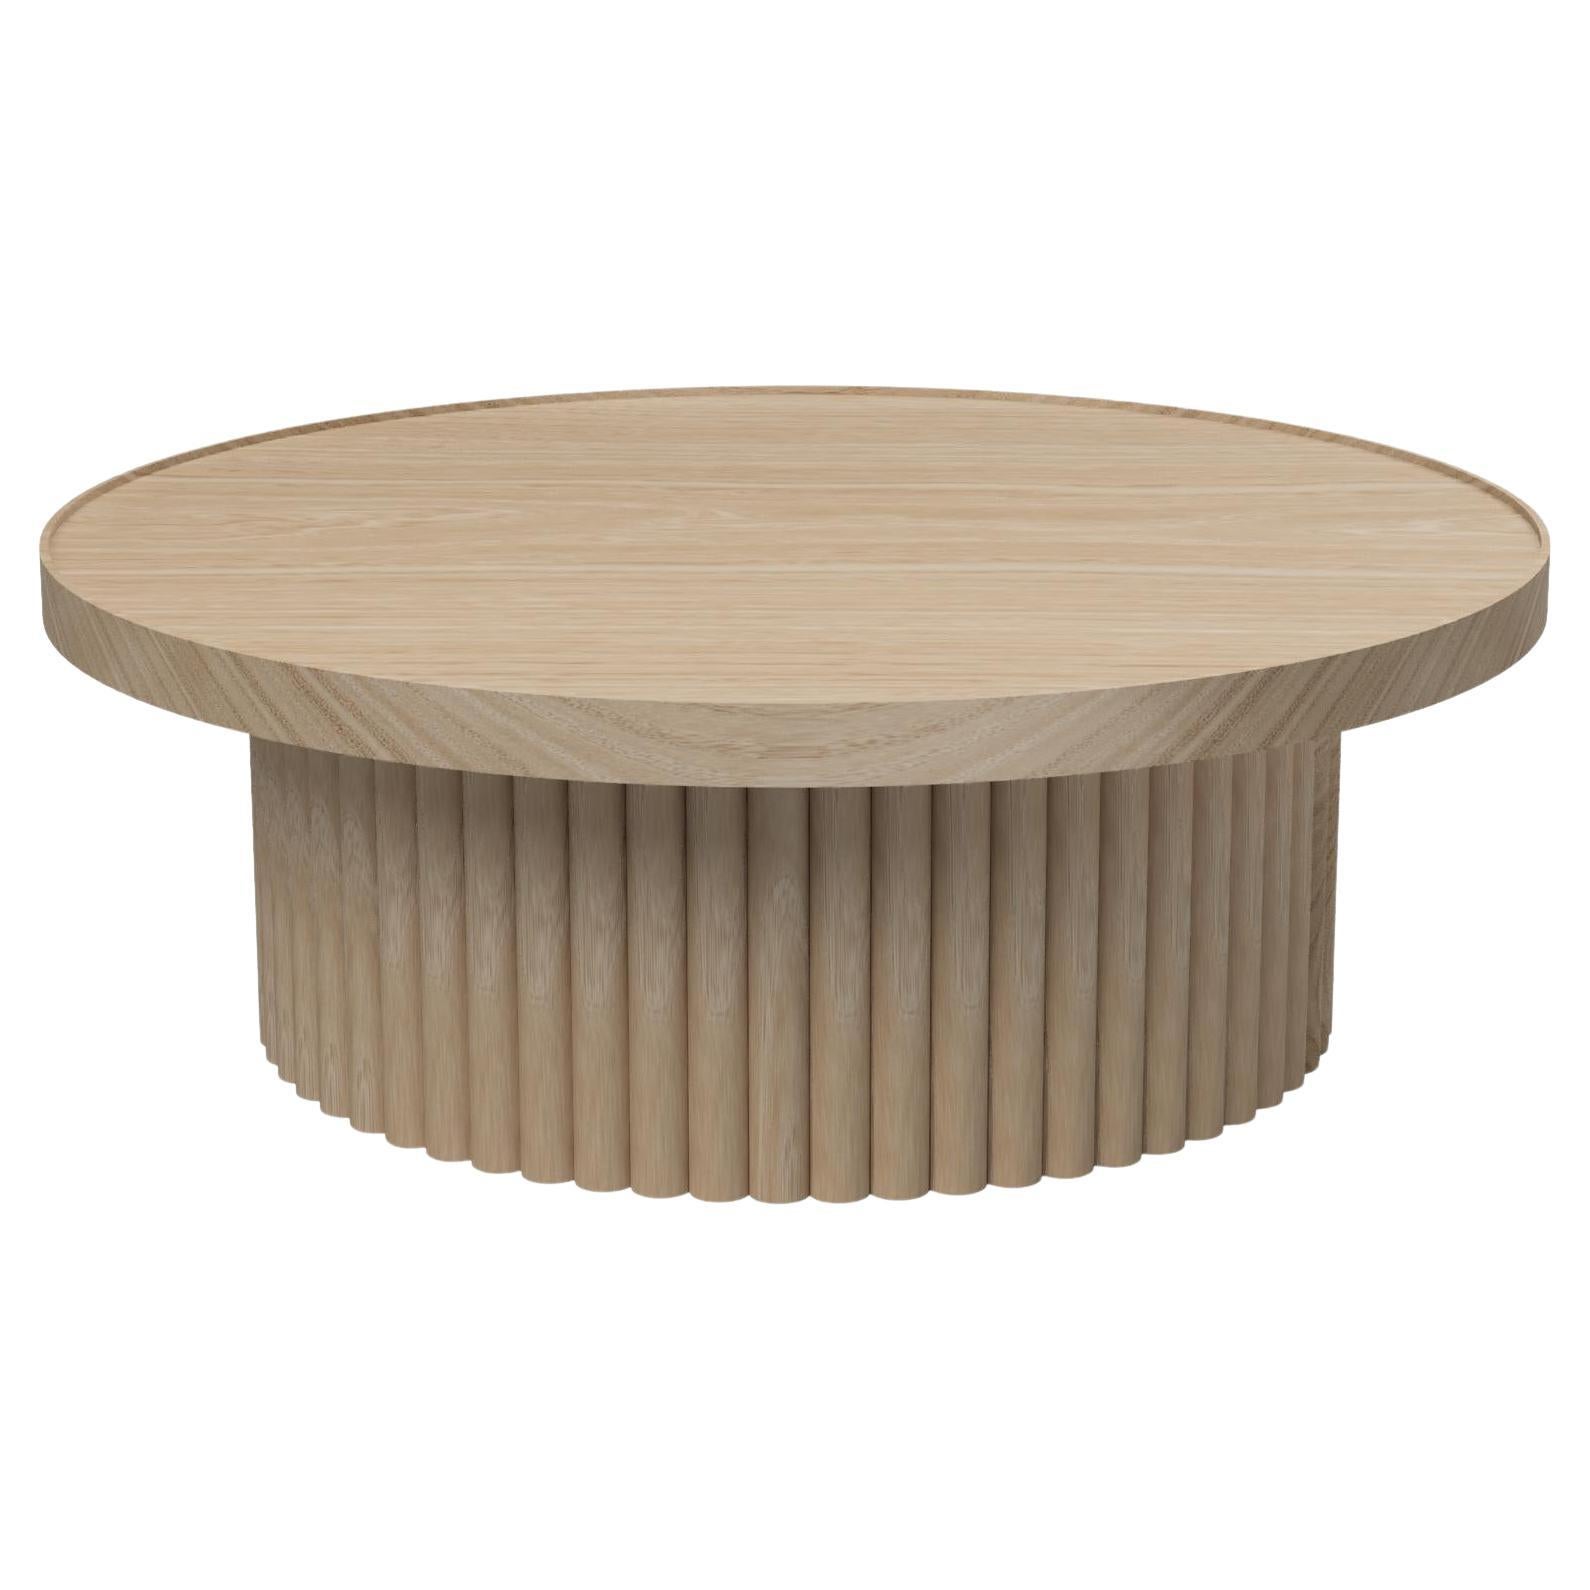 Modern White Oak Loki Coffee Table from the Signature Series by Pompous Fox